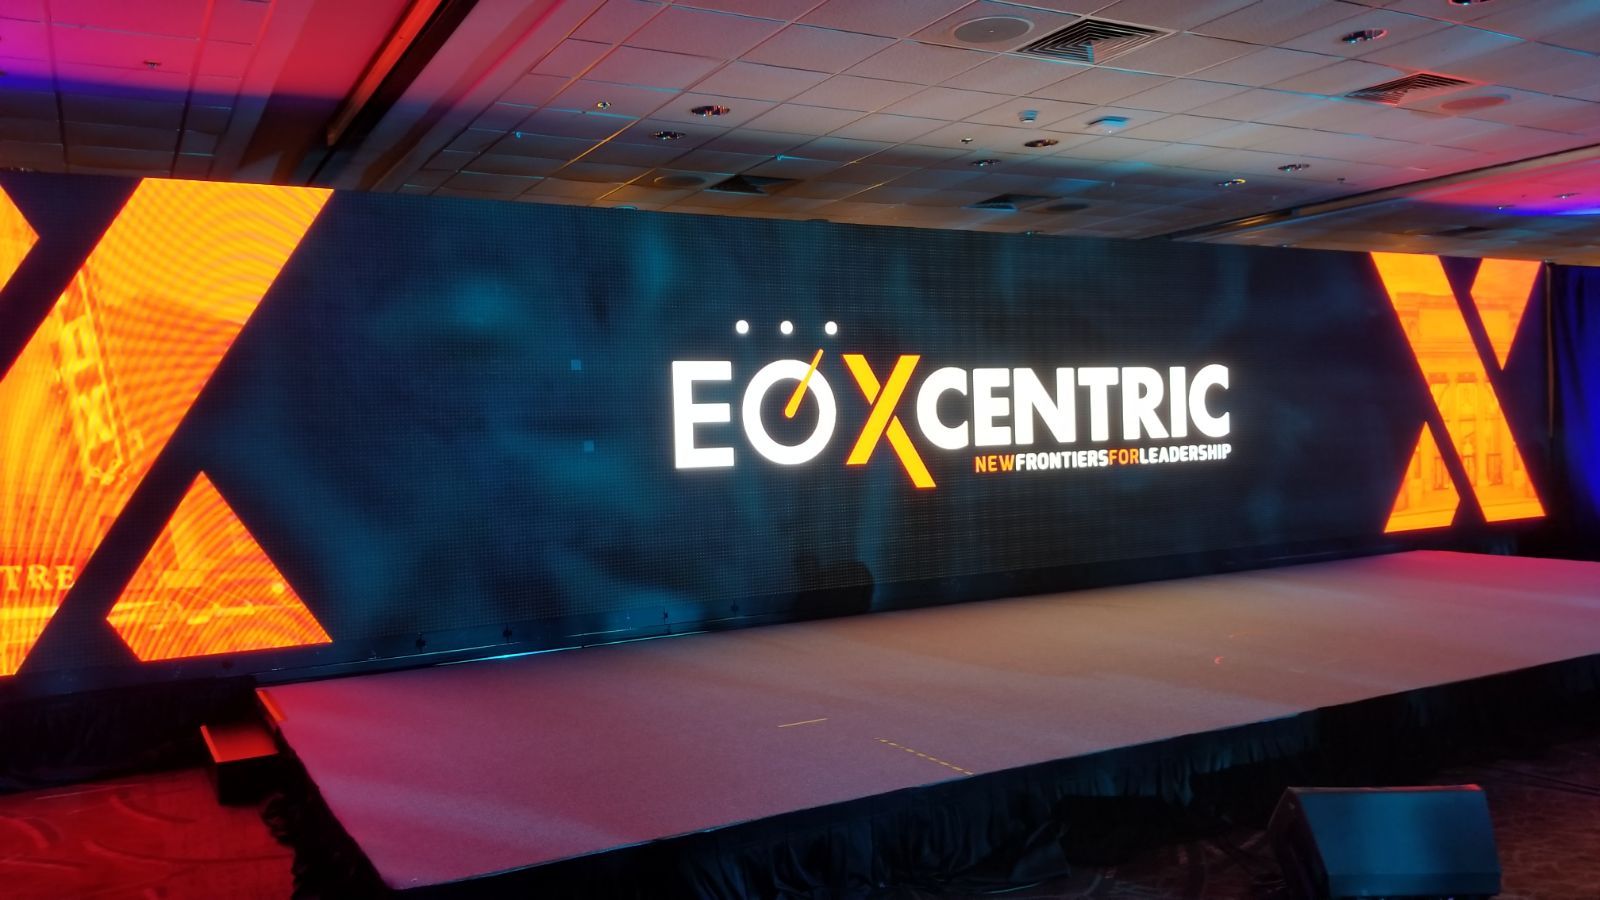 Large LED Video Wall at Conference